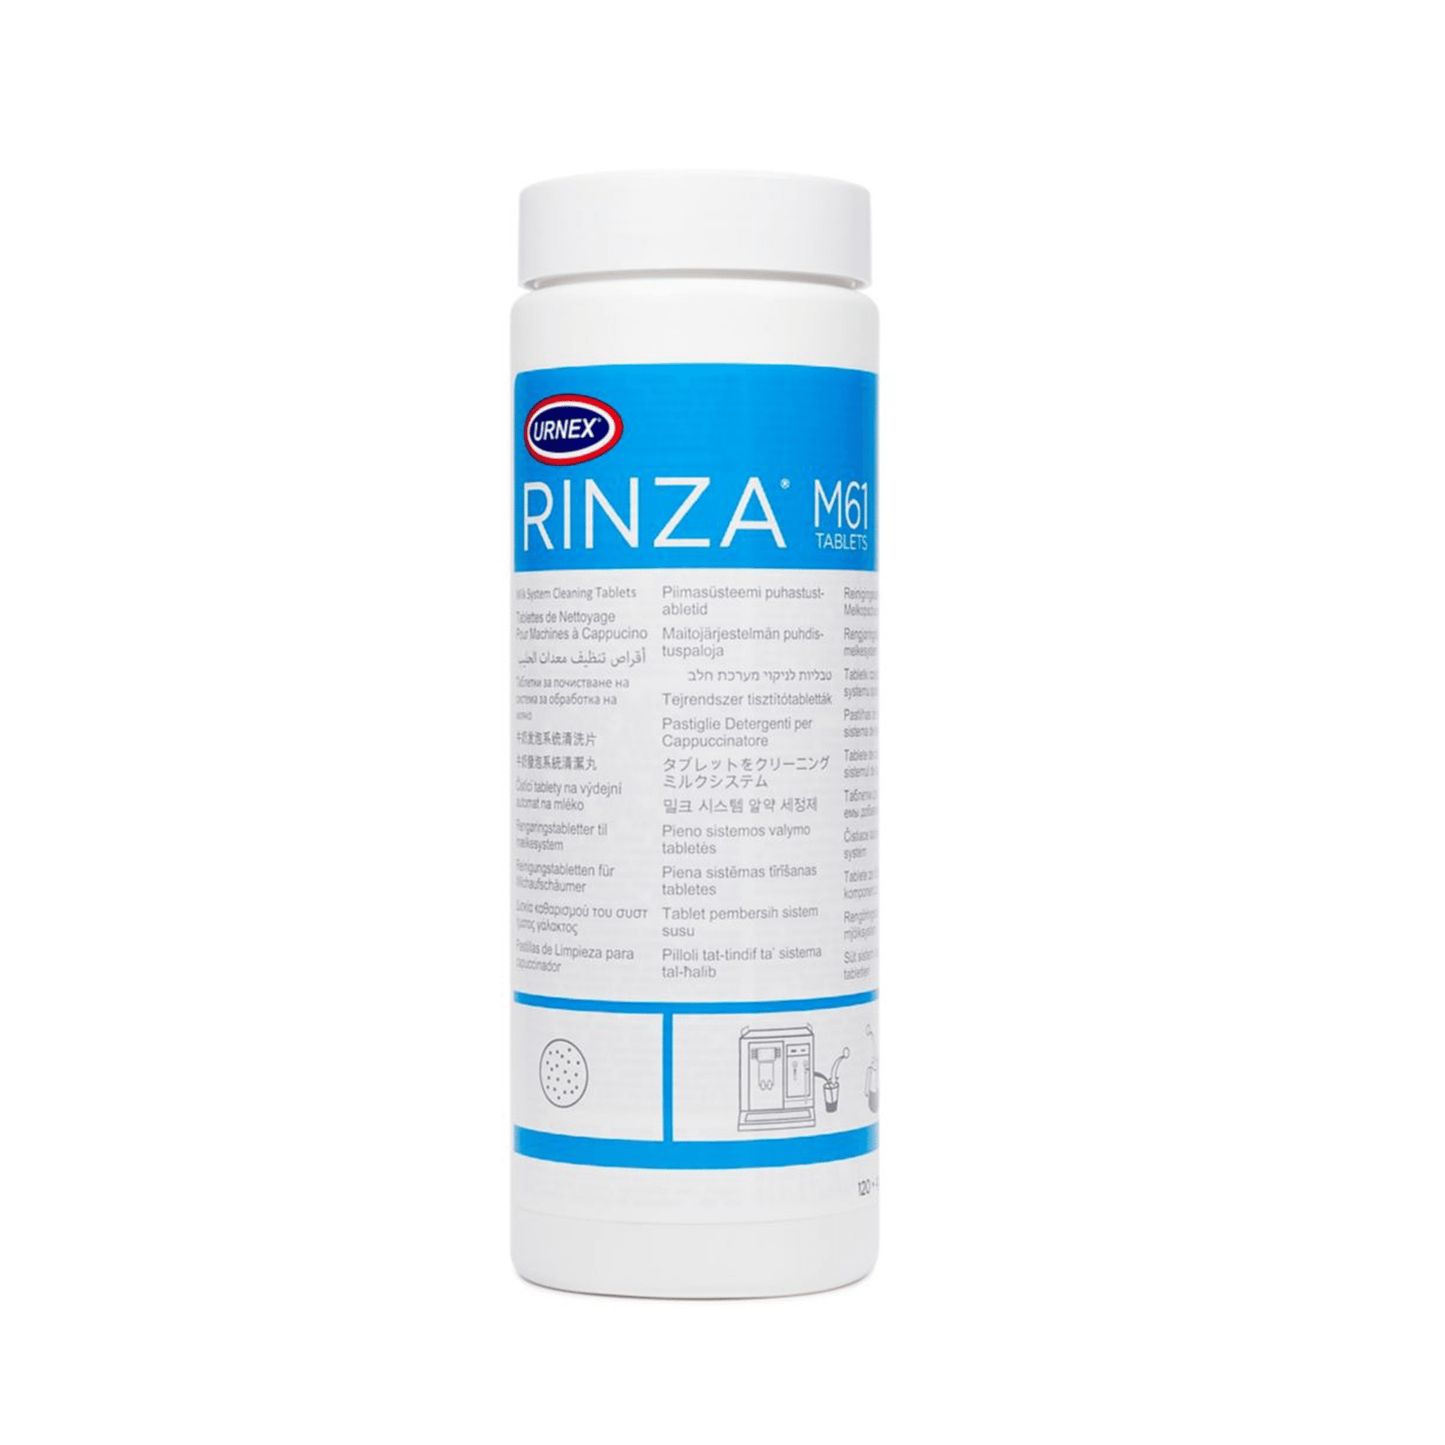 URNEX - Rinza Milk Frother Cleaning Tablets